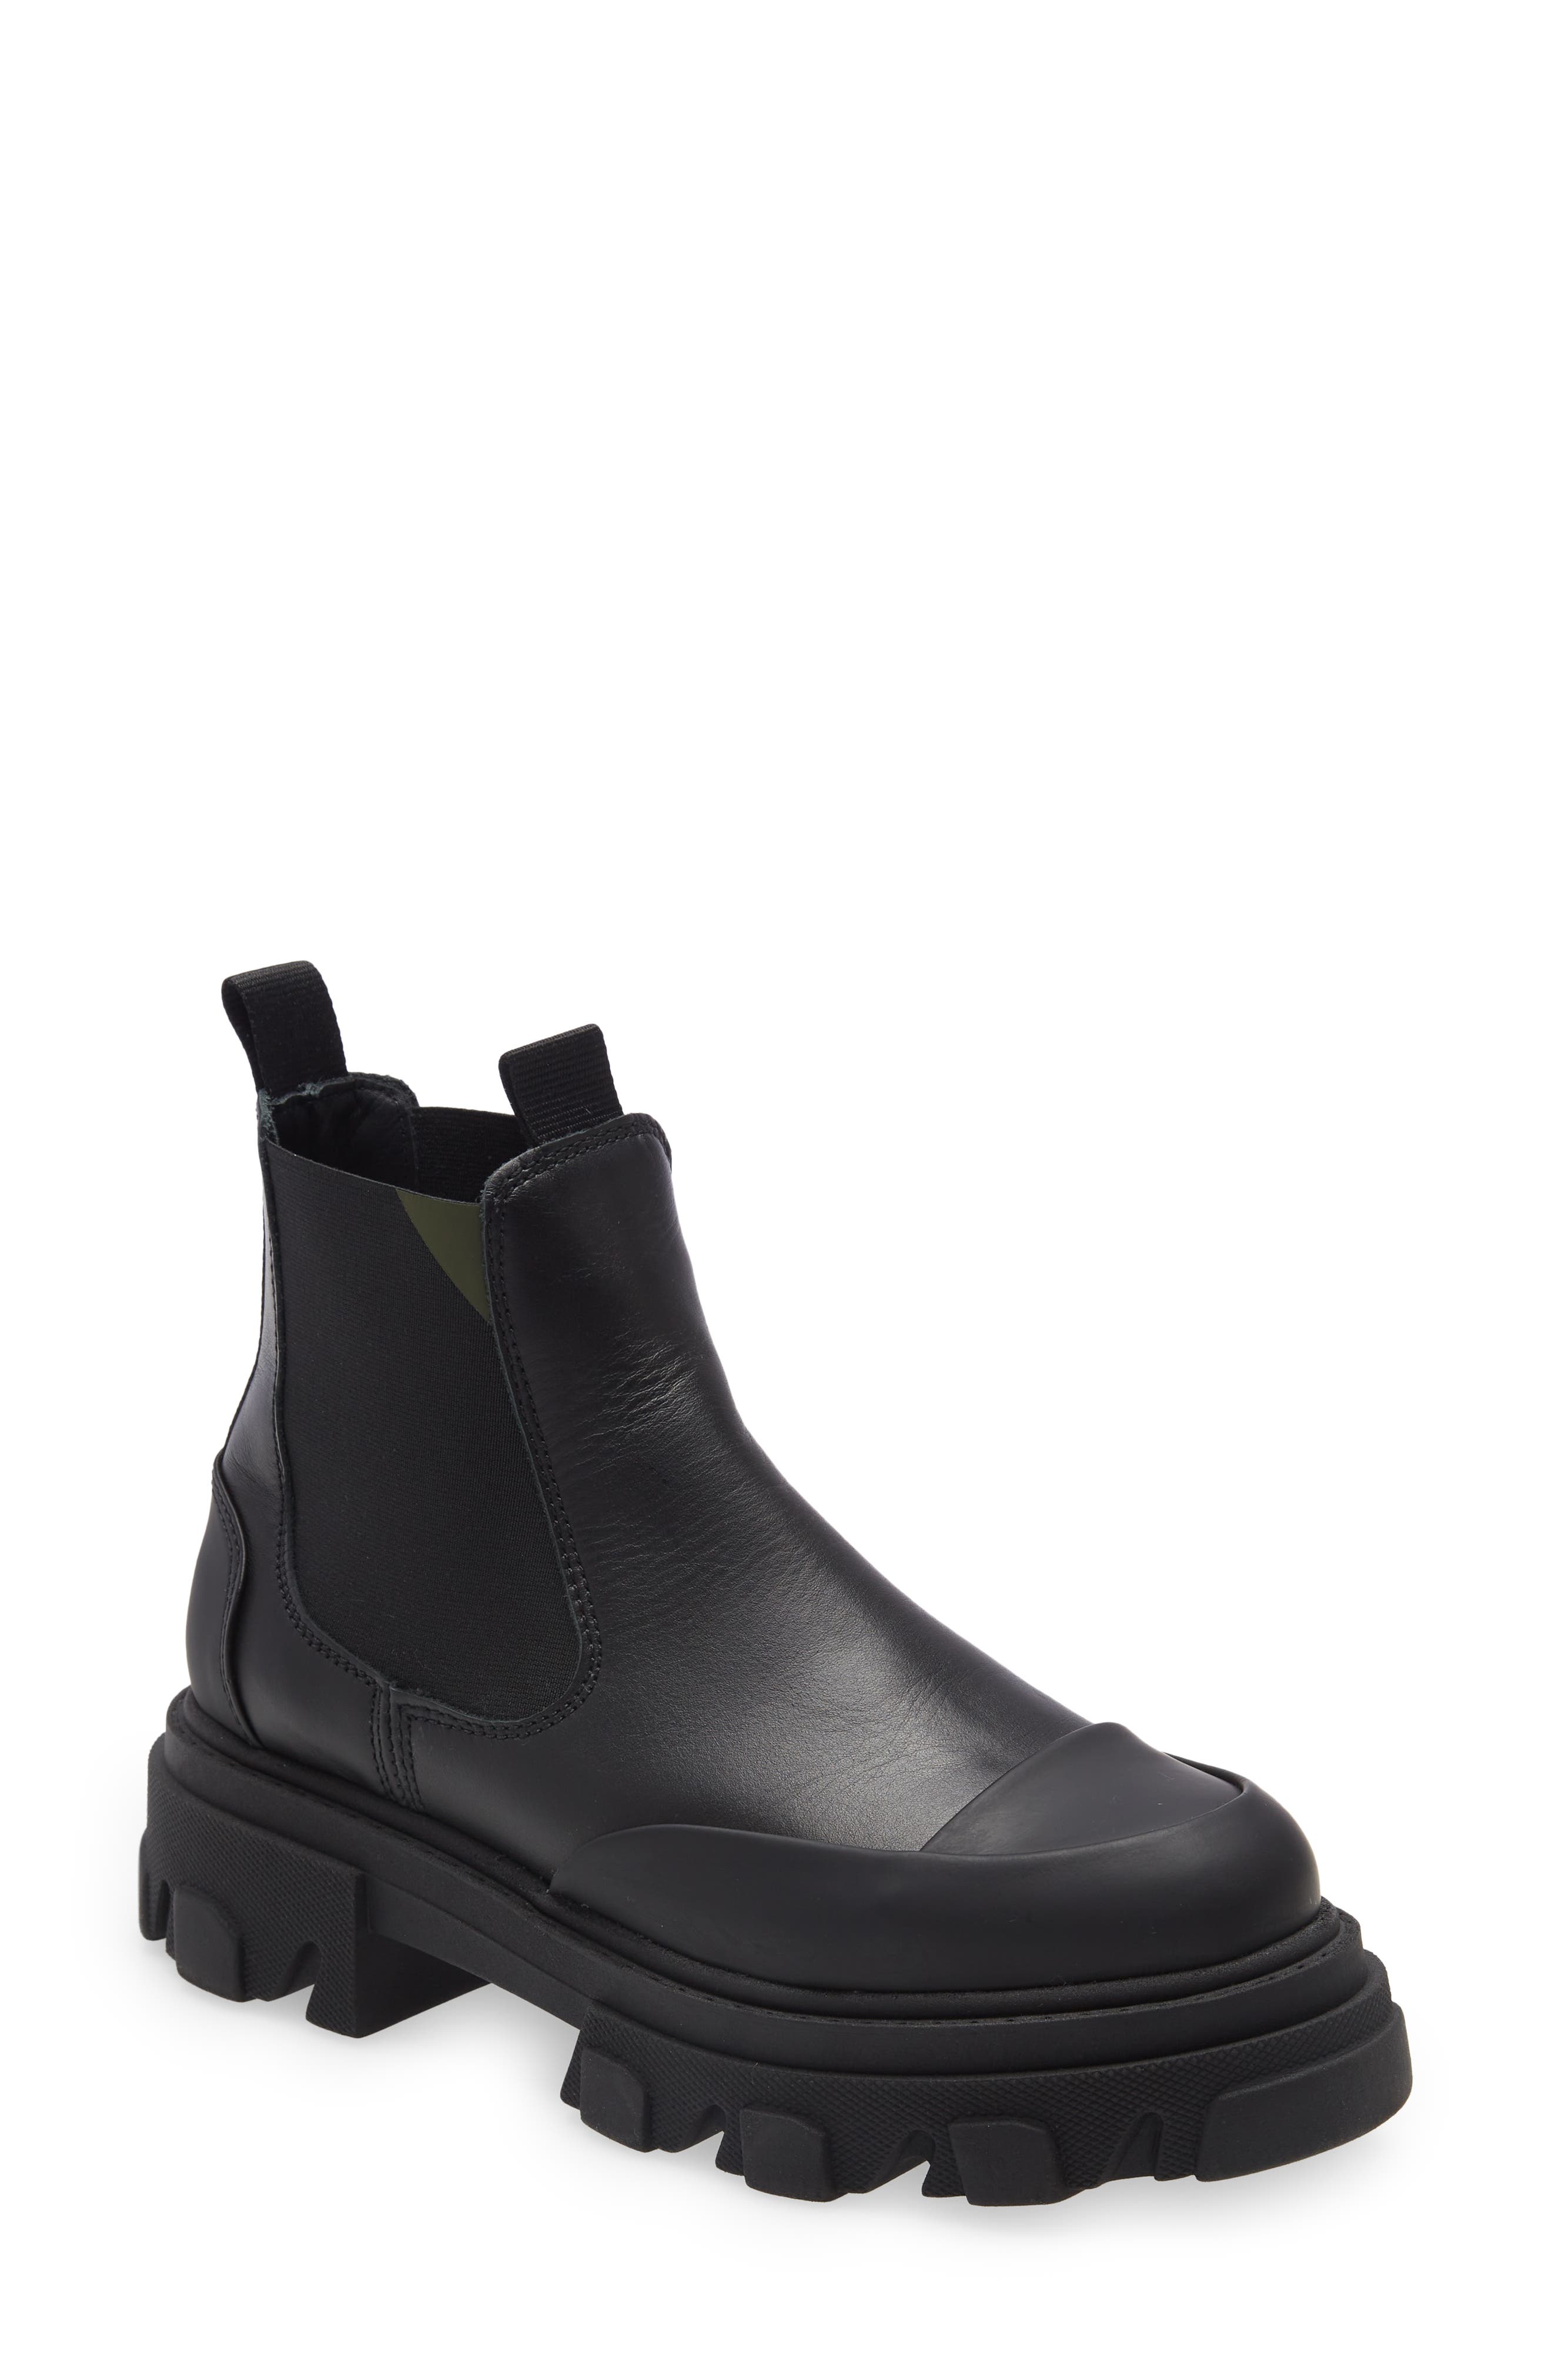 Ganni Calf Leather Low Chelsea Boot in Black at Nordstrom, Size 10Us